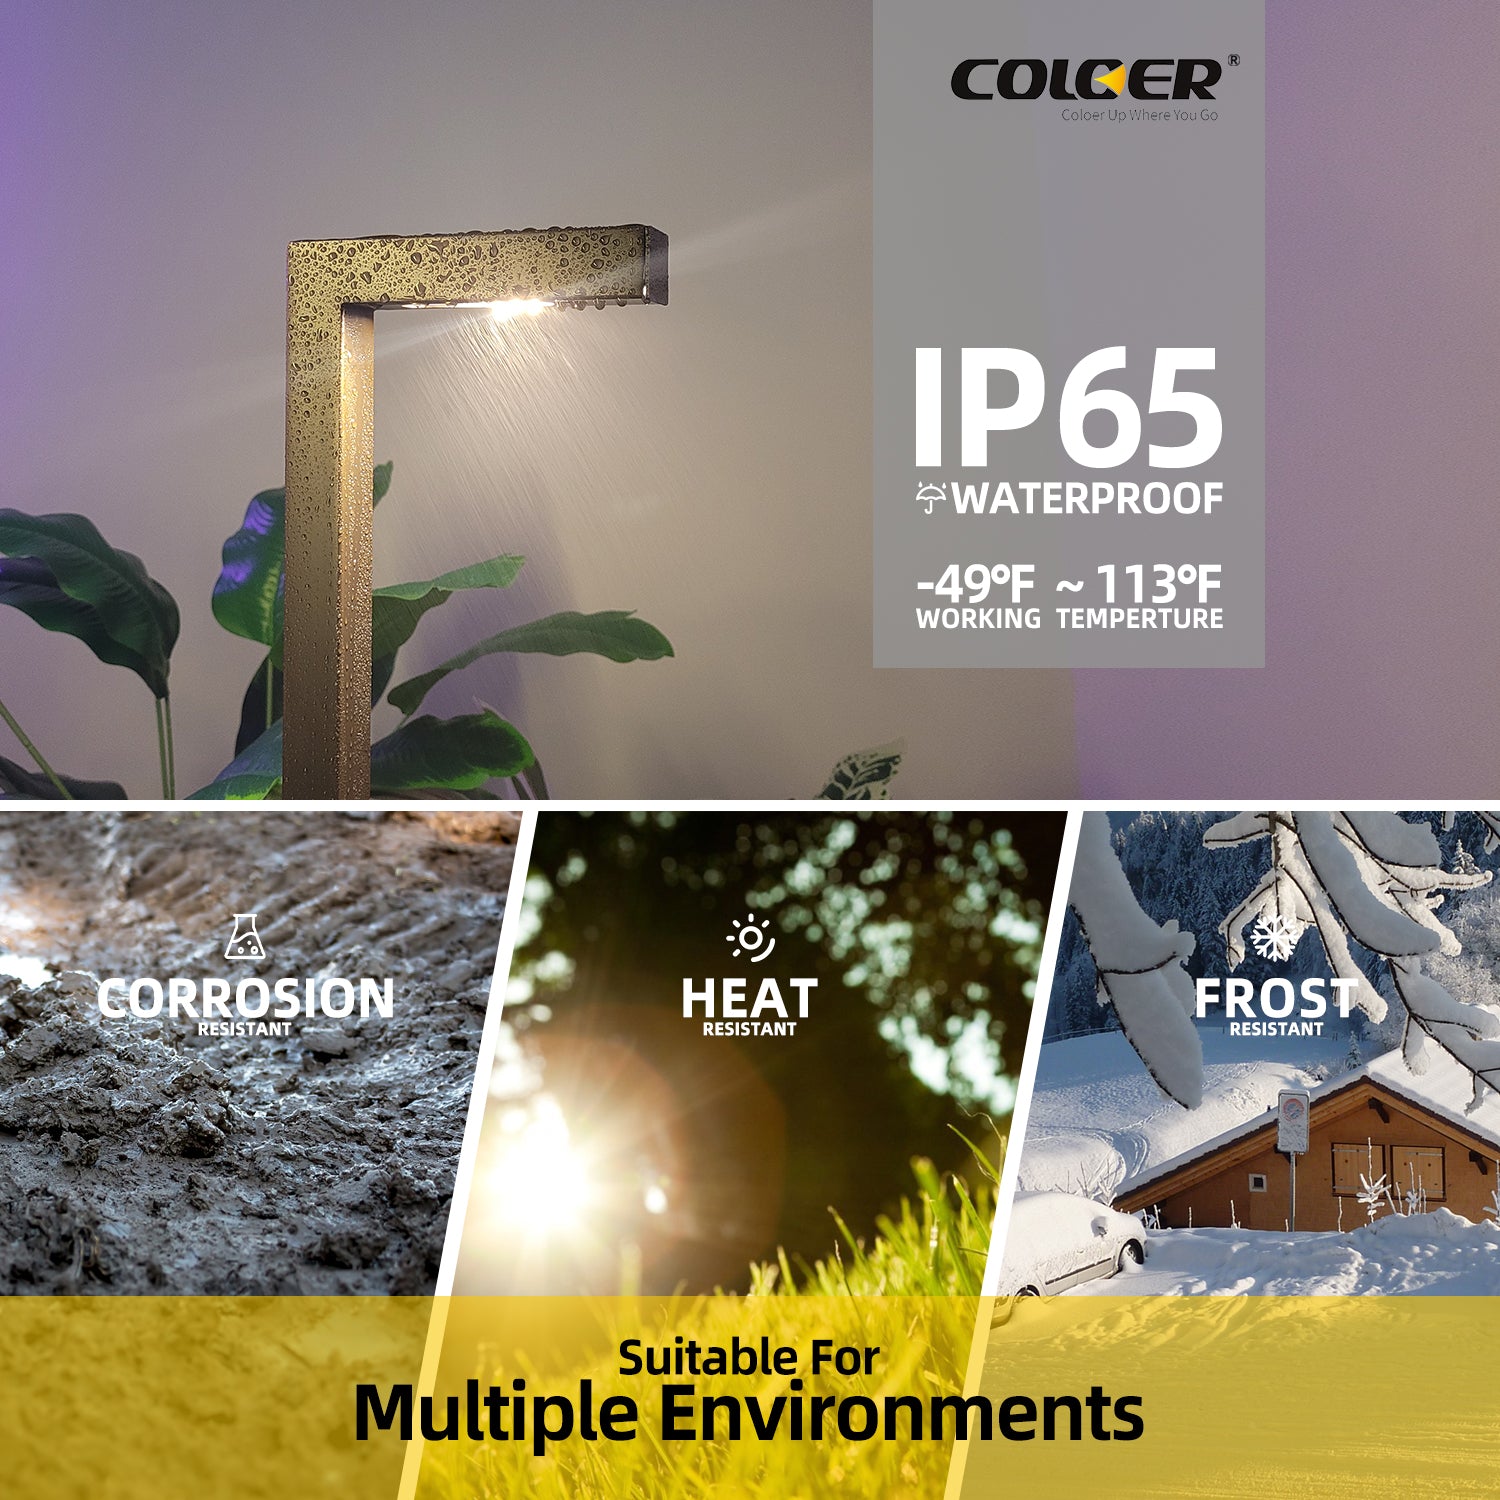 IP65 waterproof low voltage brass path light suitable for multiple environments with corrosion, heat, and frost resistance